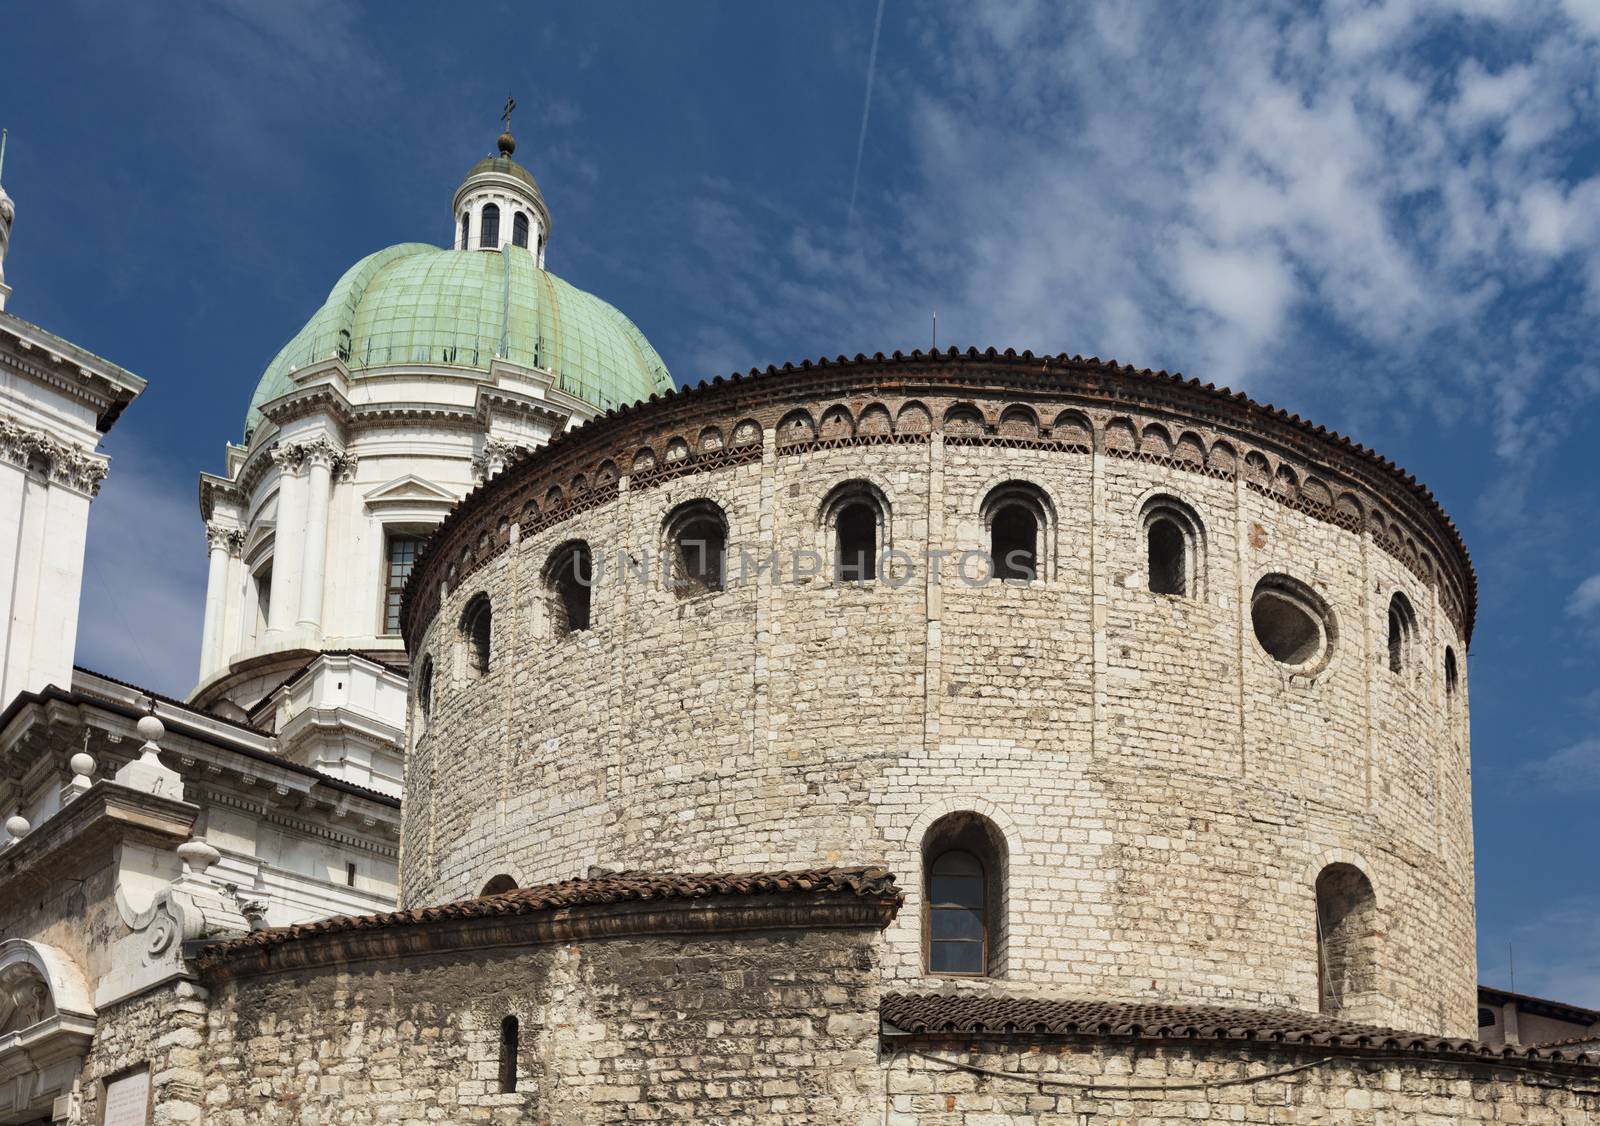 Brescia, Italy, Europe, August 2019, A view of the Old Cathedral, the Duomo Vecchio